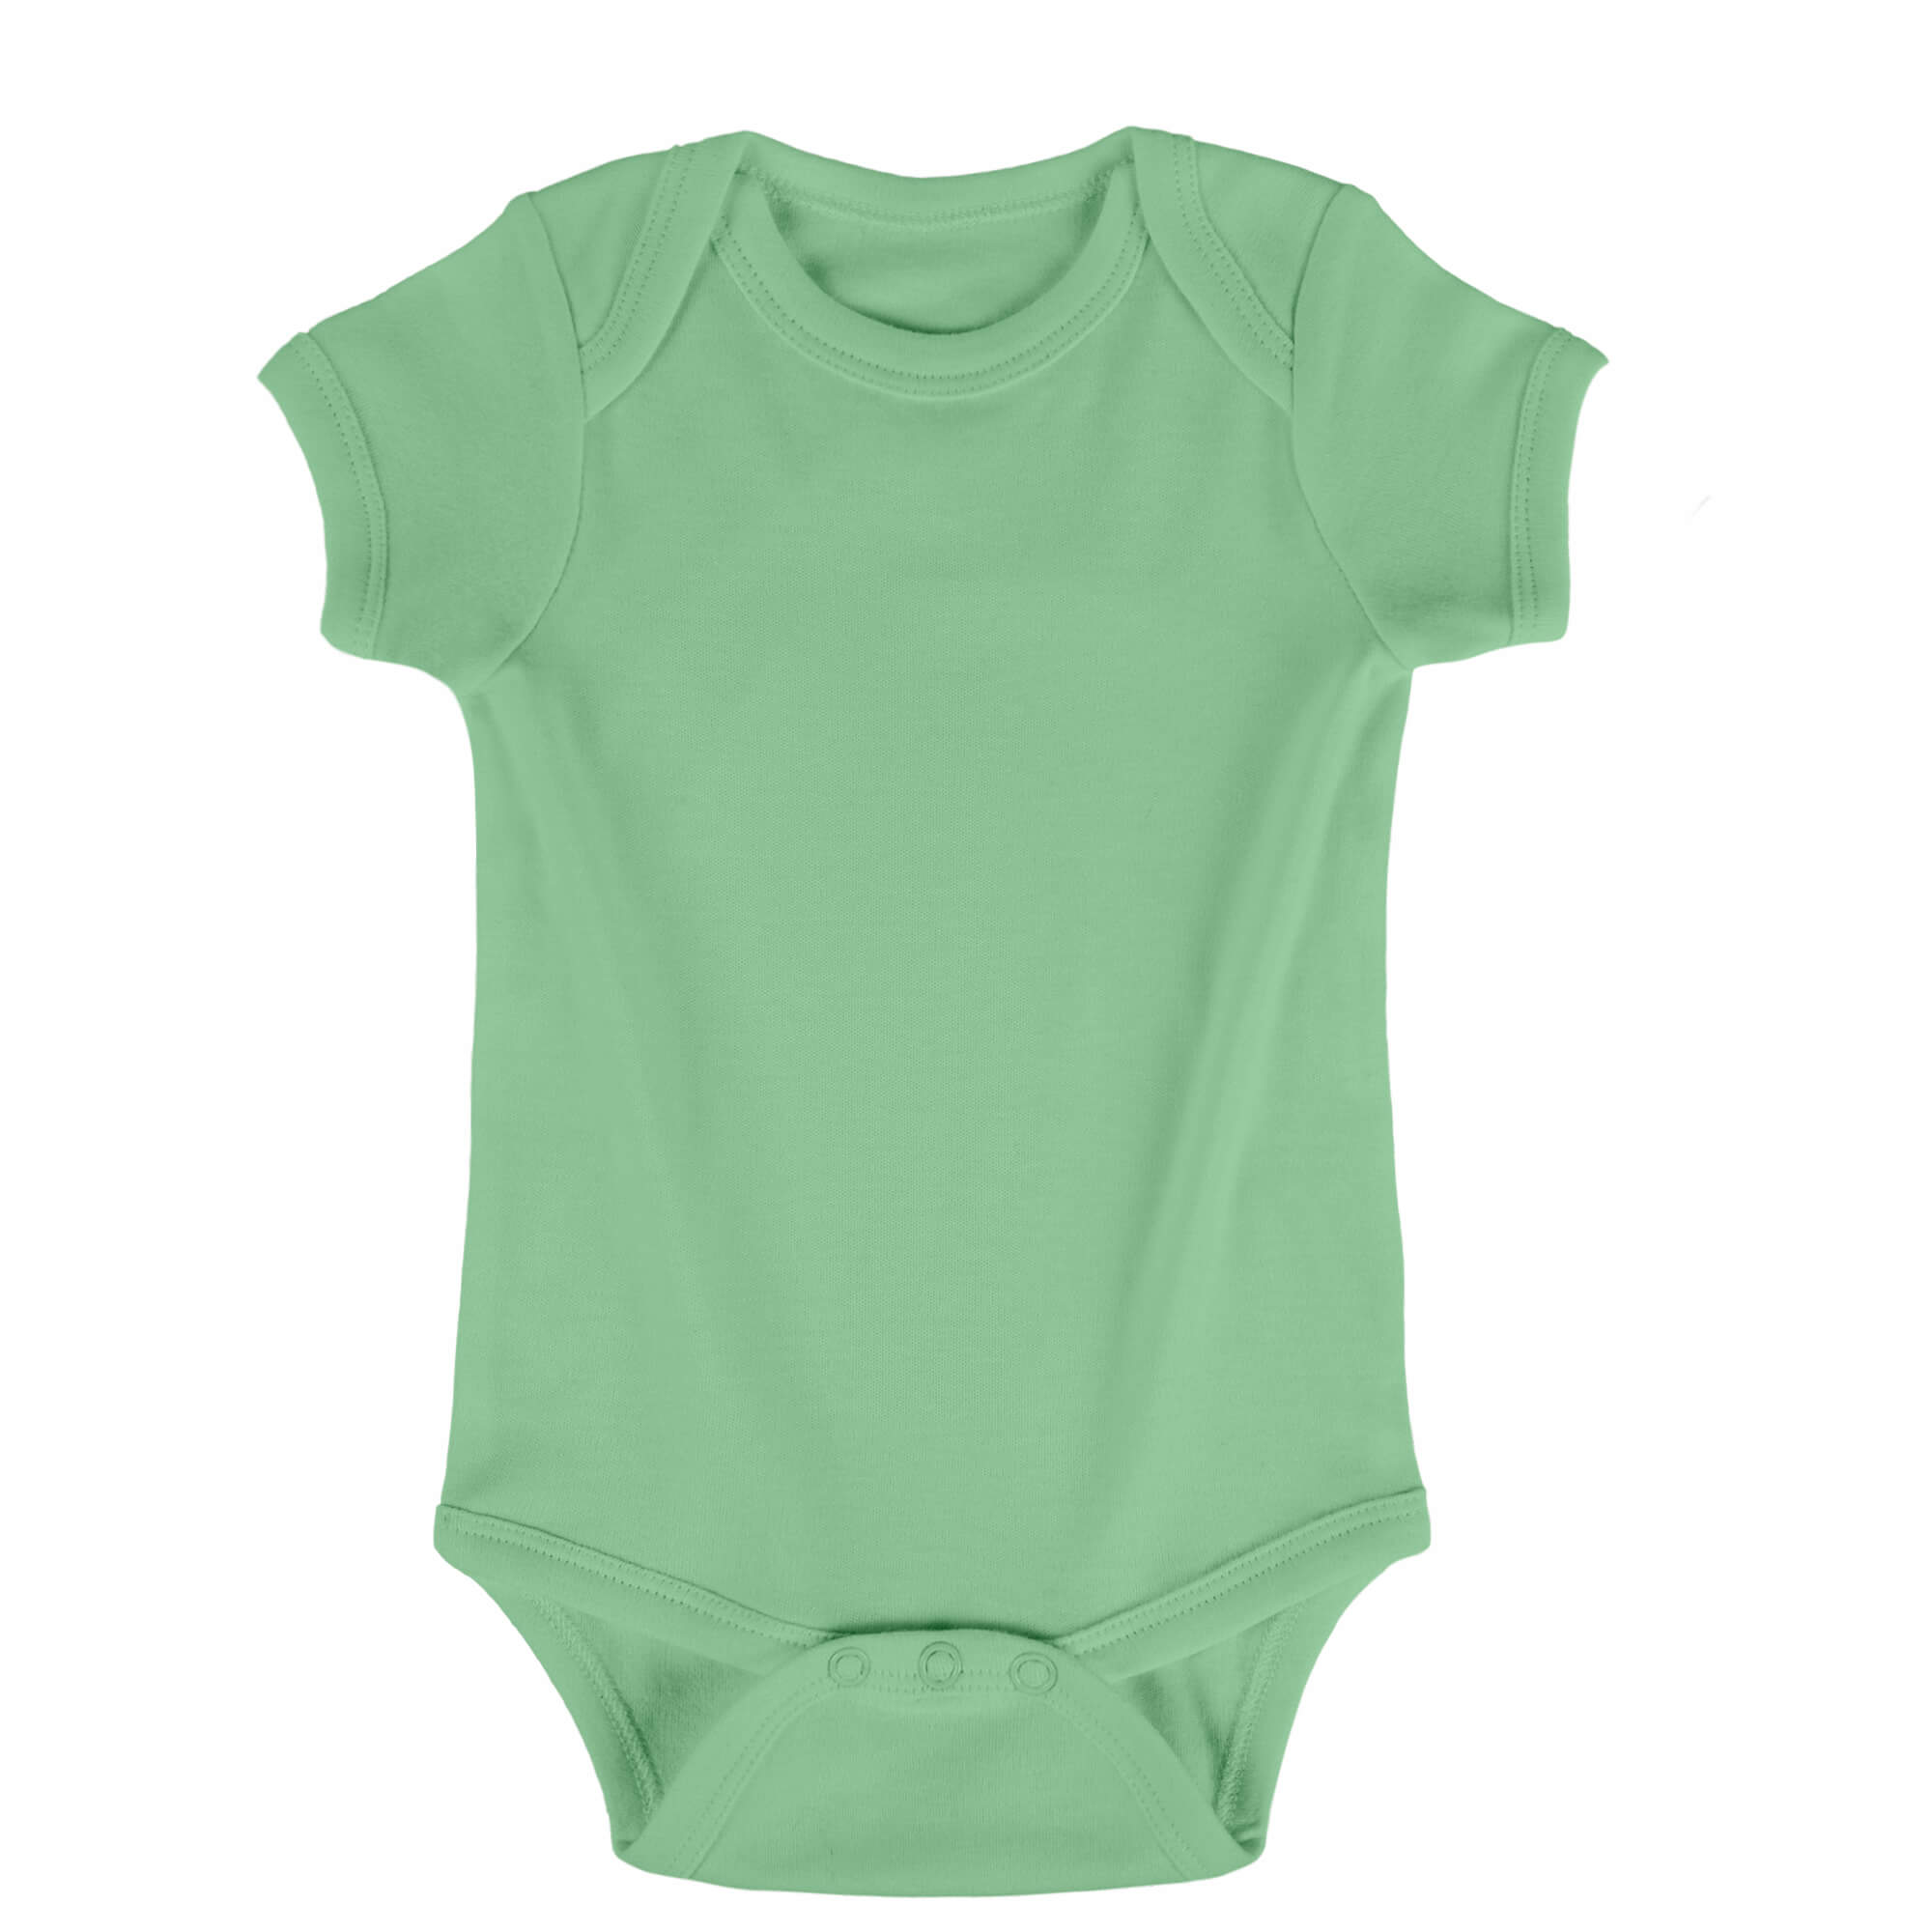 Light grass color color number #76, onesie color selection, and color display.